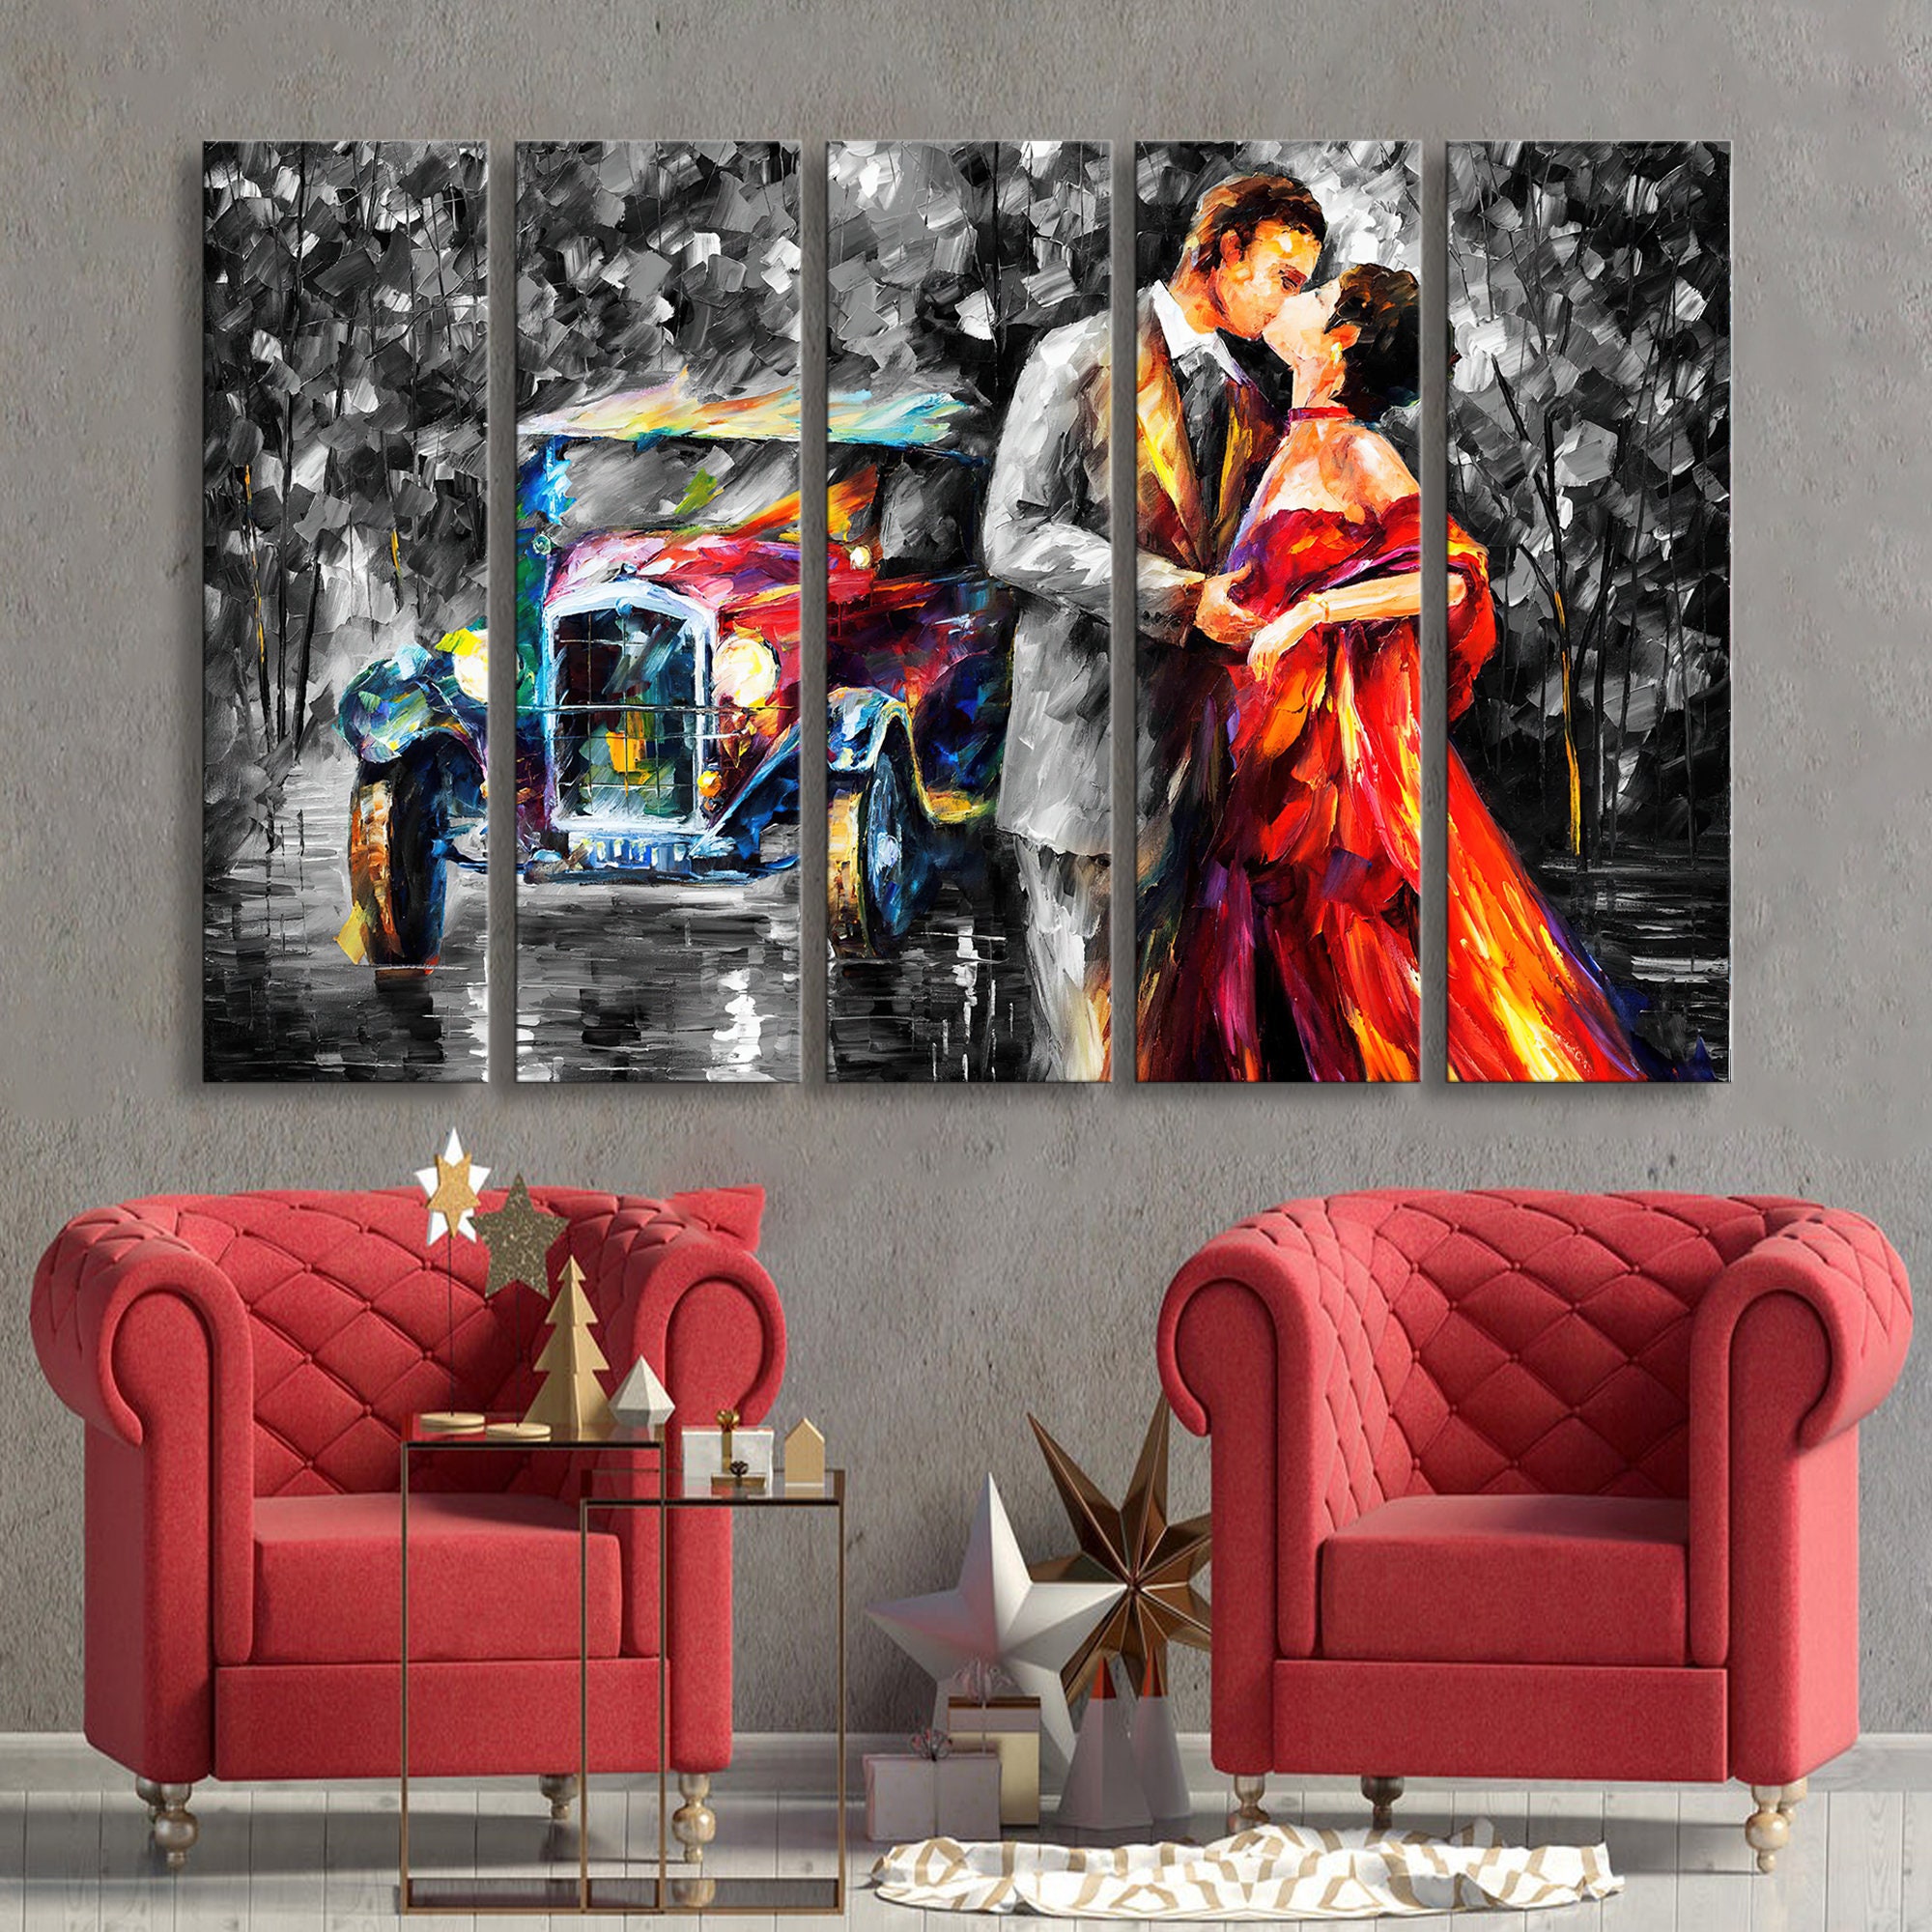 Kiss at starry night - pop art painting on large canvas, kissing